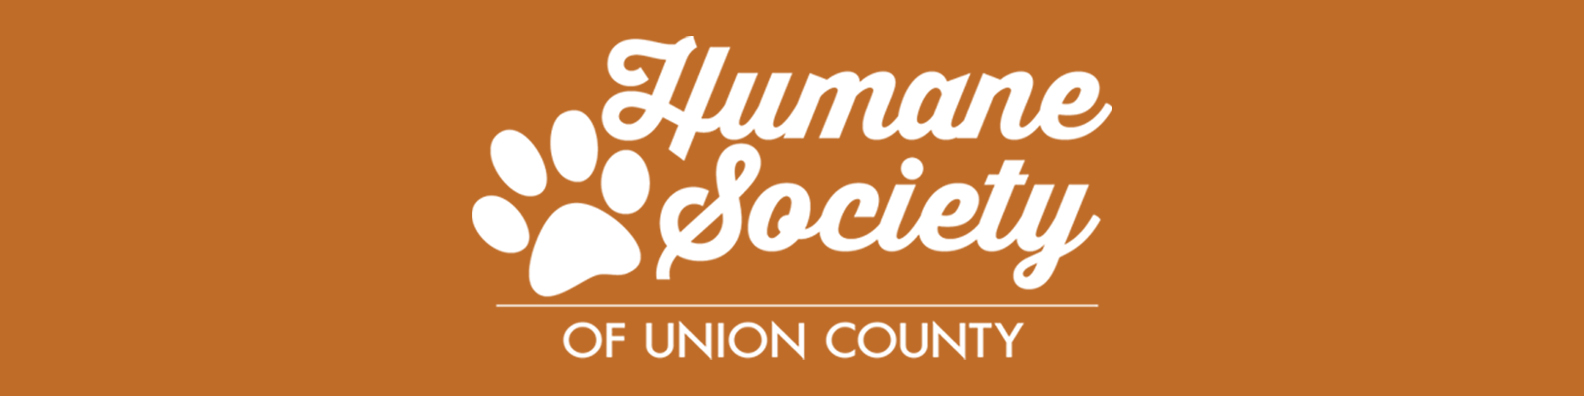 Humane Society of UNION County